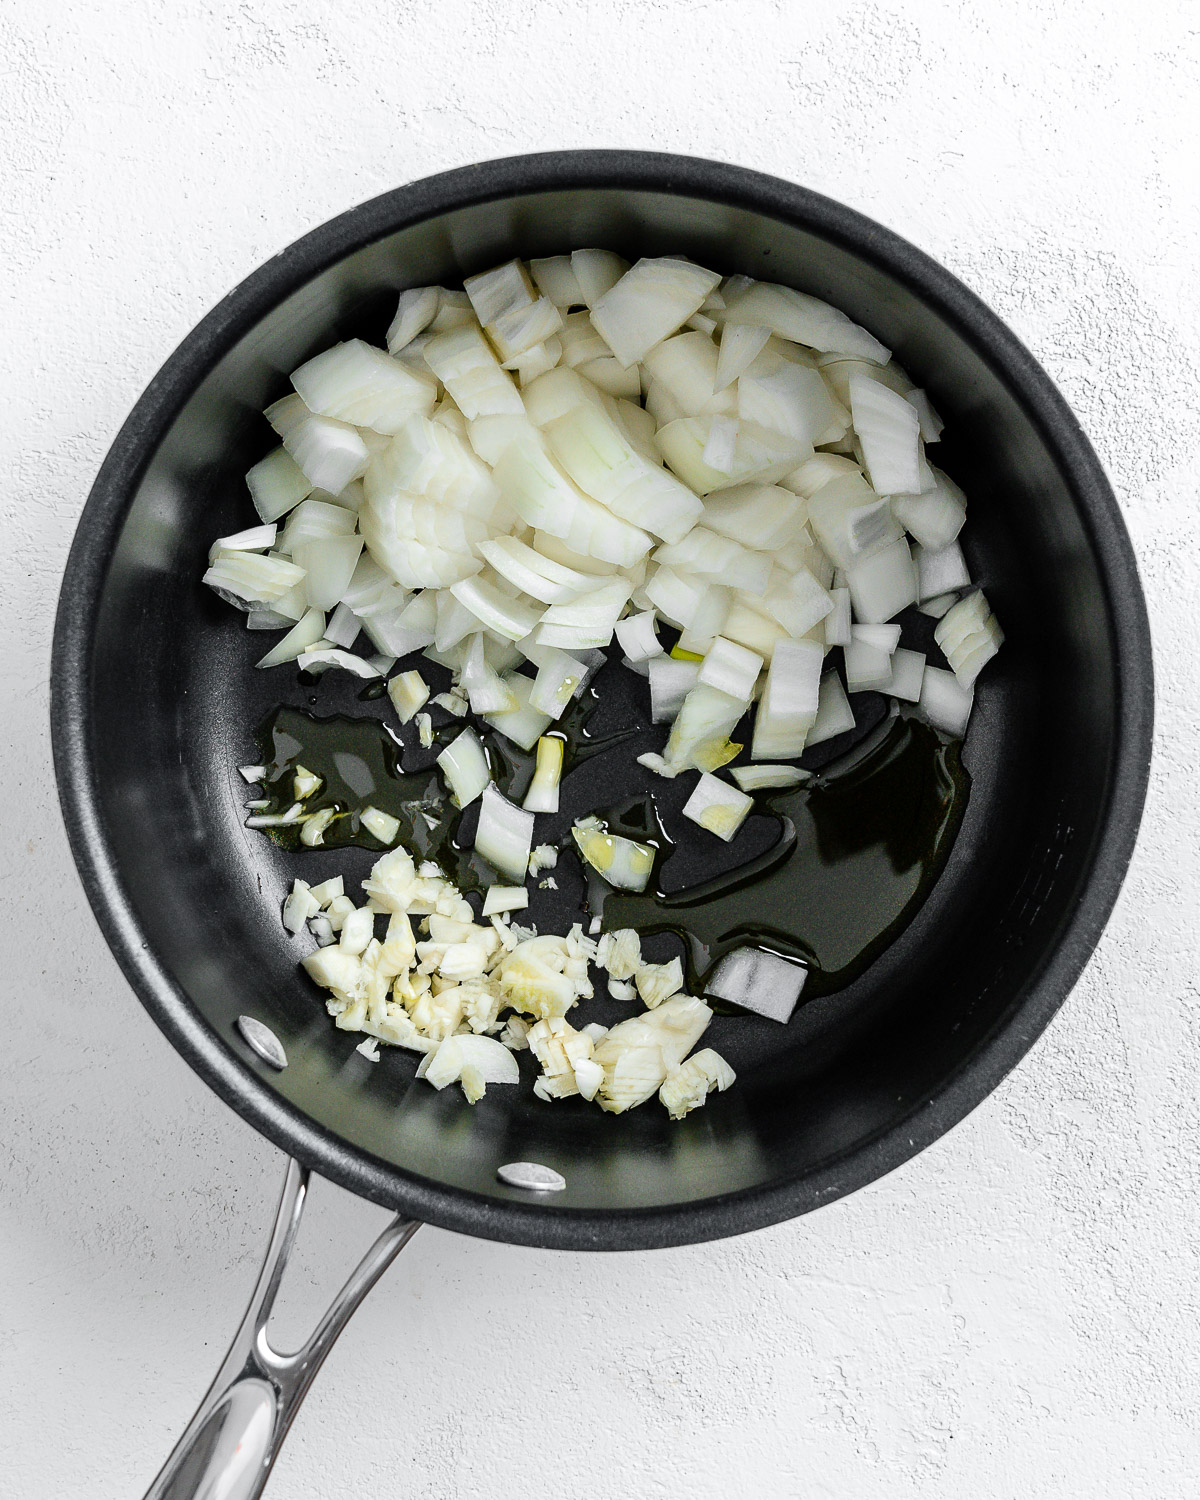 process of cooking onion and garlic in black pan against white background